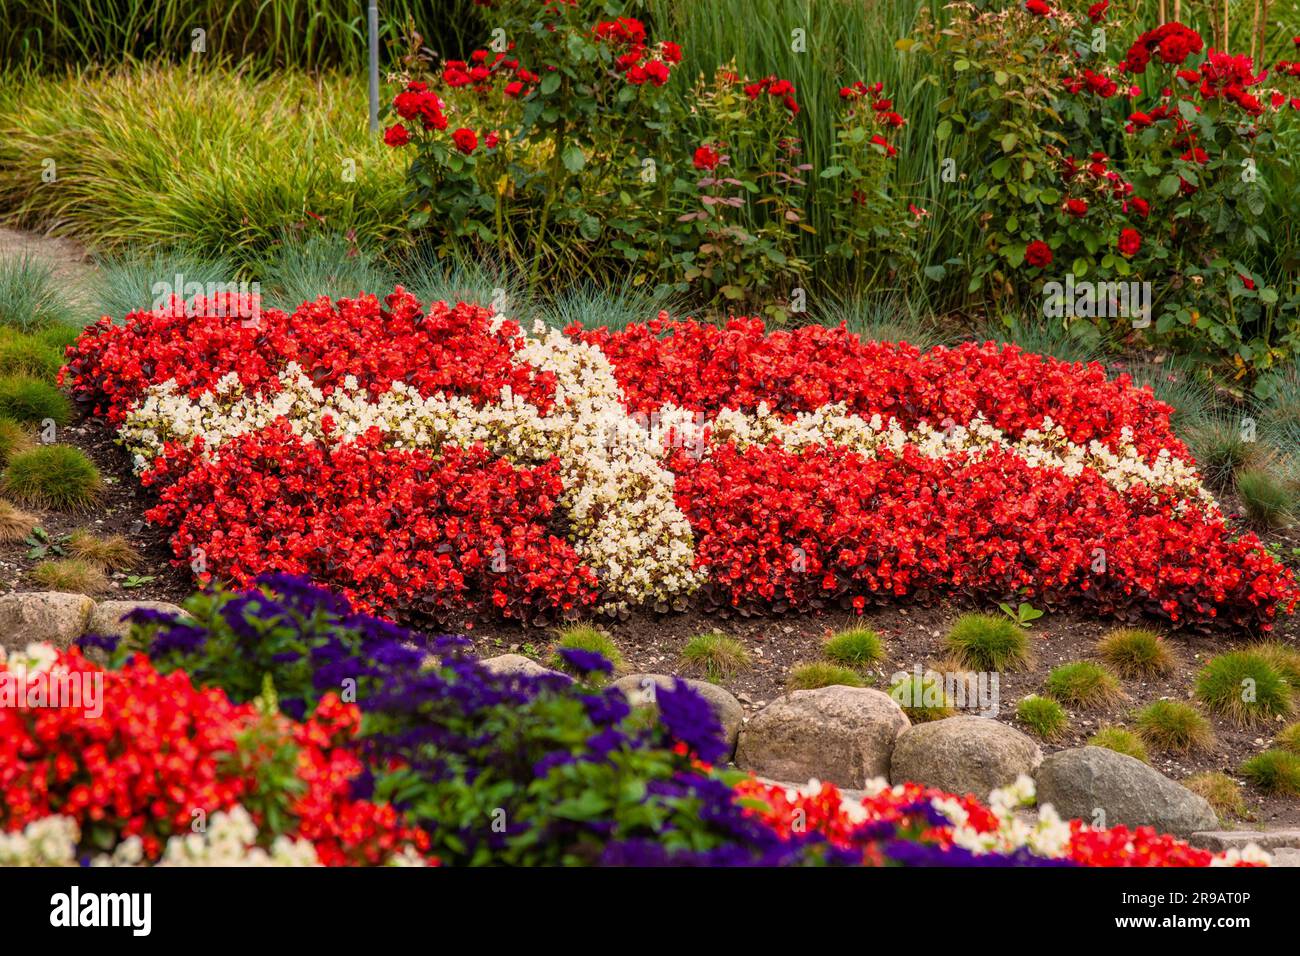 Flower garden with red and white flowers illustrating the danish flag Stock Photo